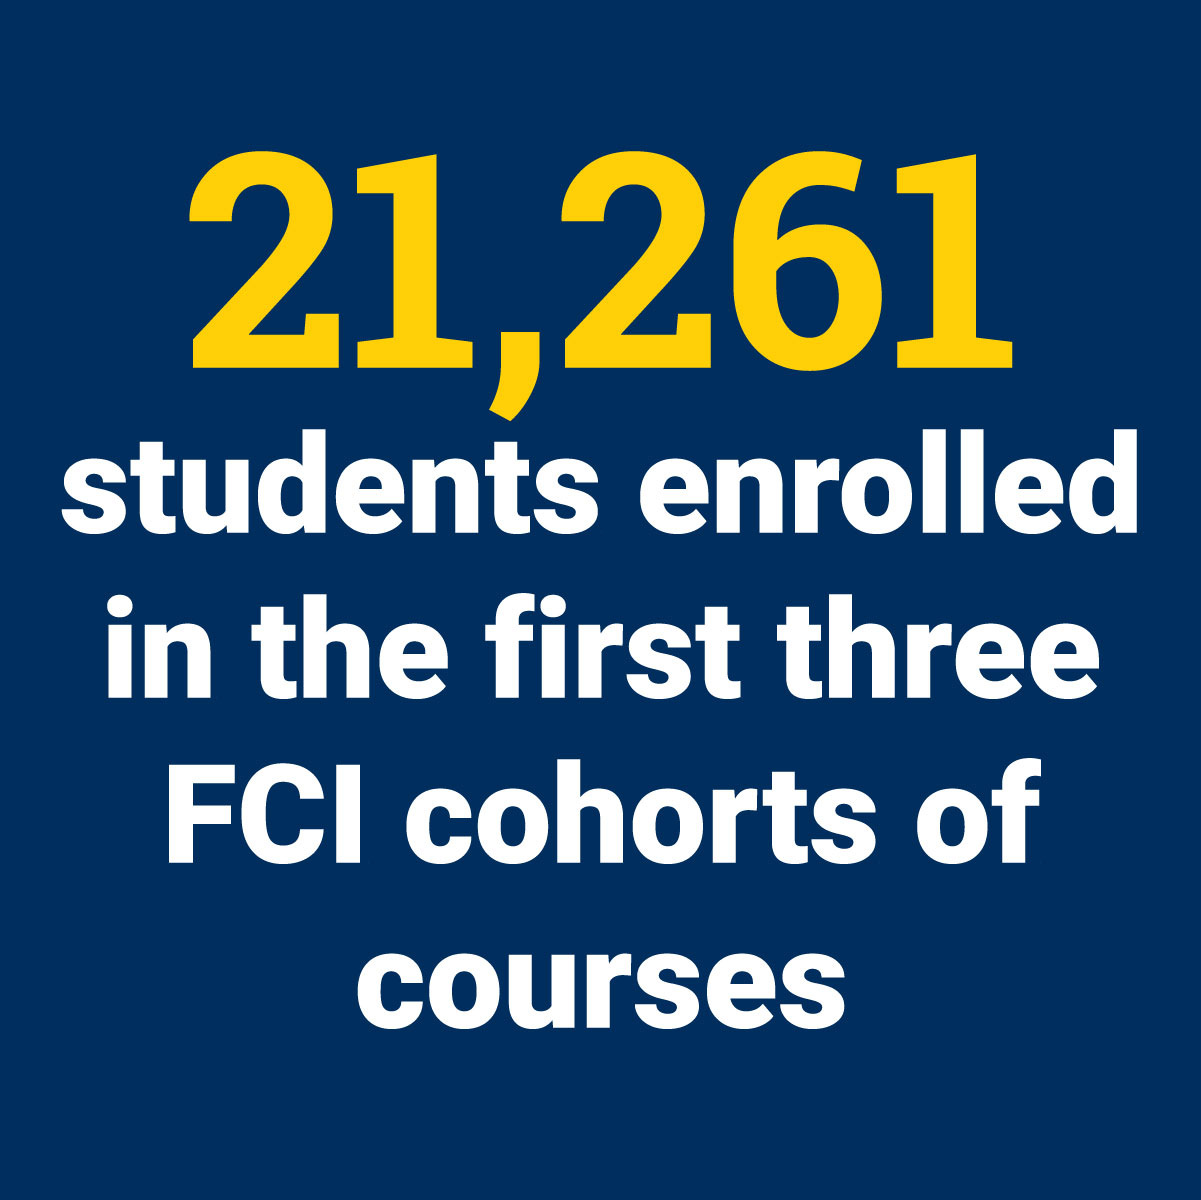 21,261  students enrolled in the first three FCI cohorts of courses